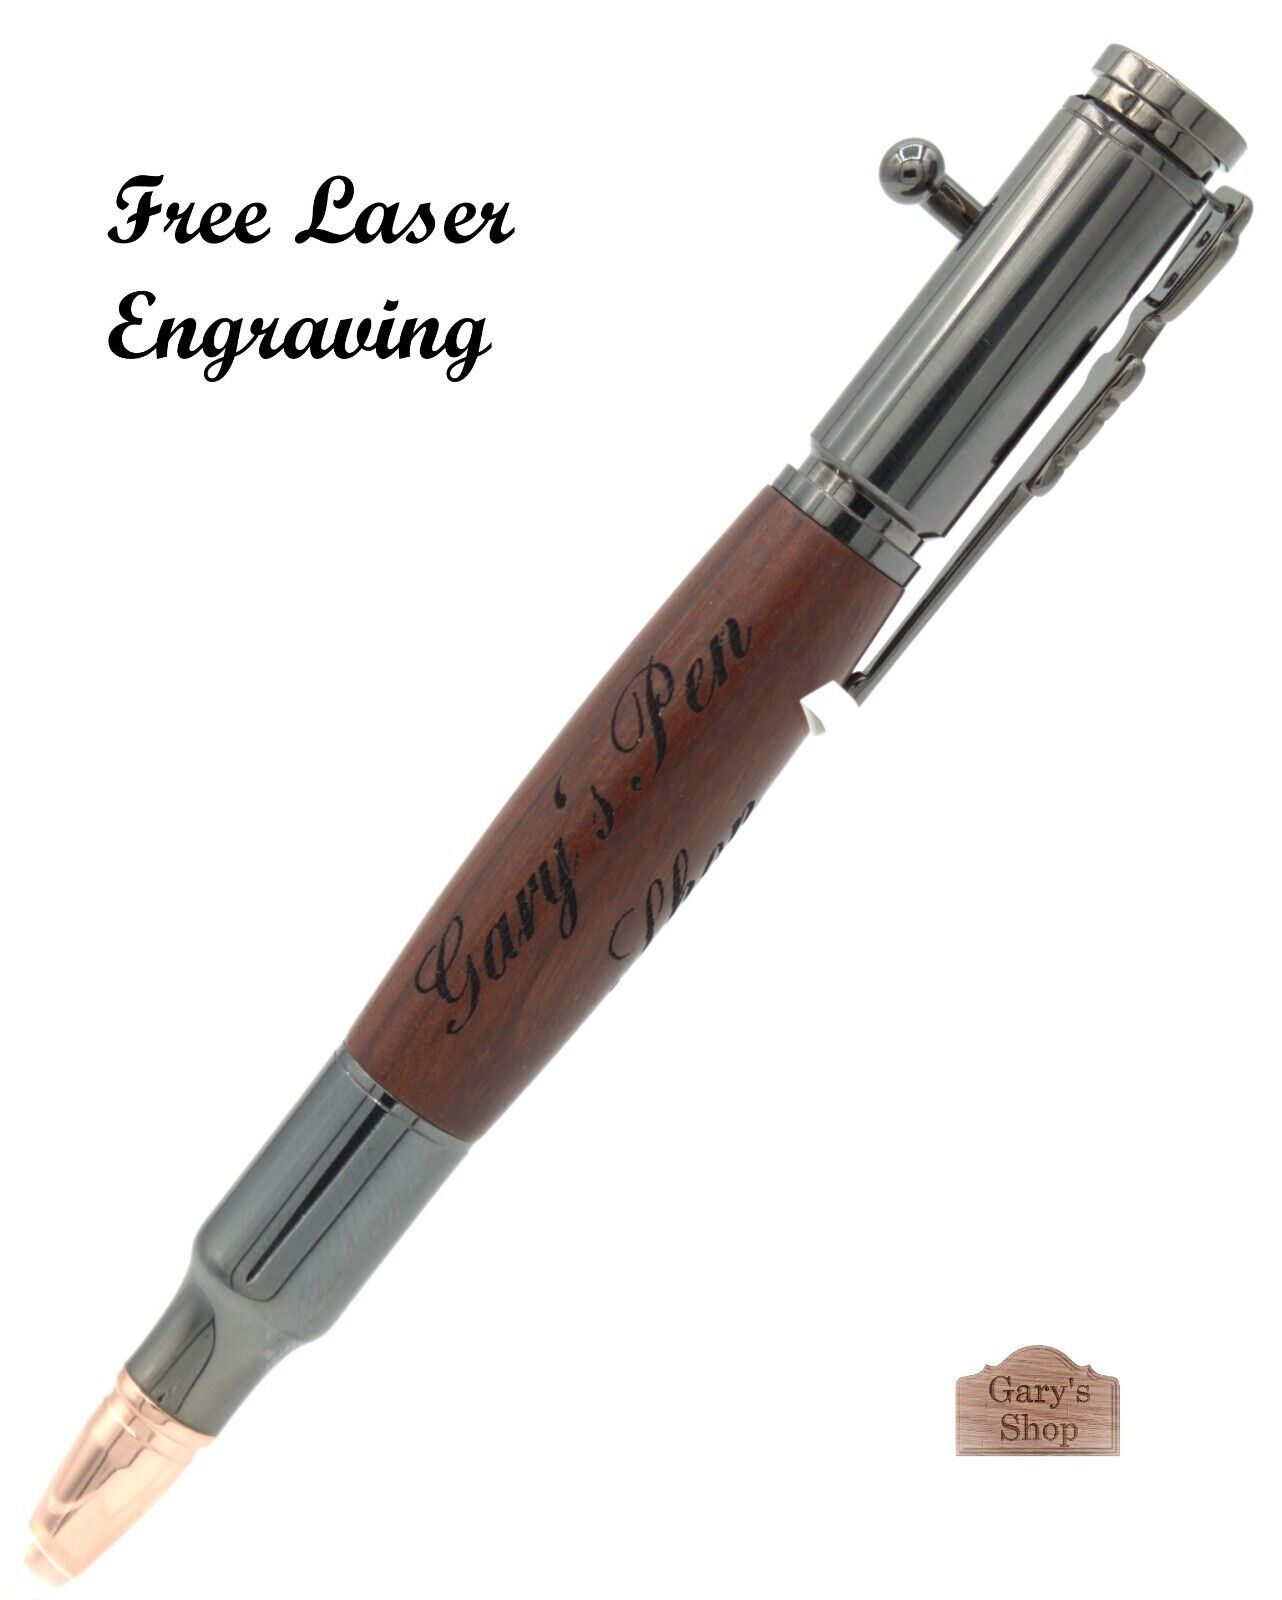 30 Caliber Bolt Action Pen - Gun Metal + Rosewood Body With Free Personalization